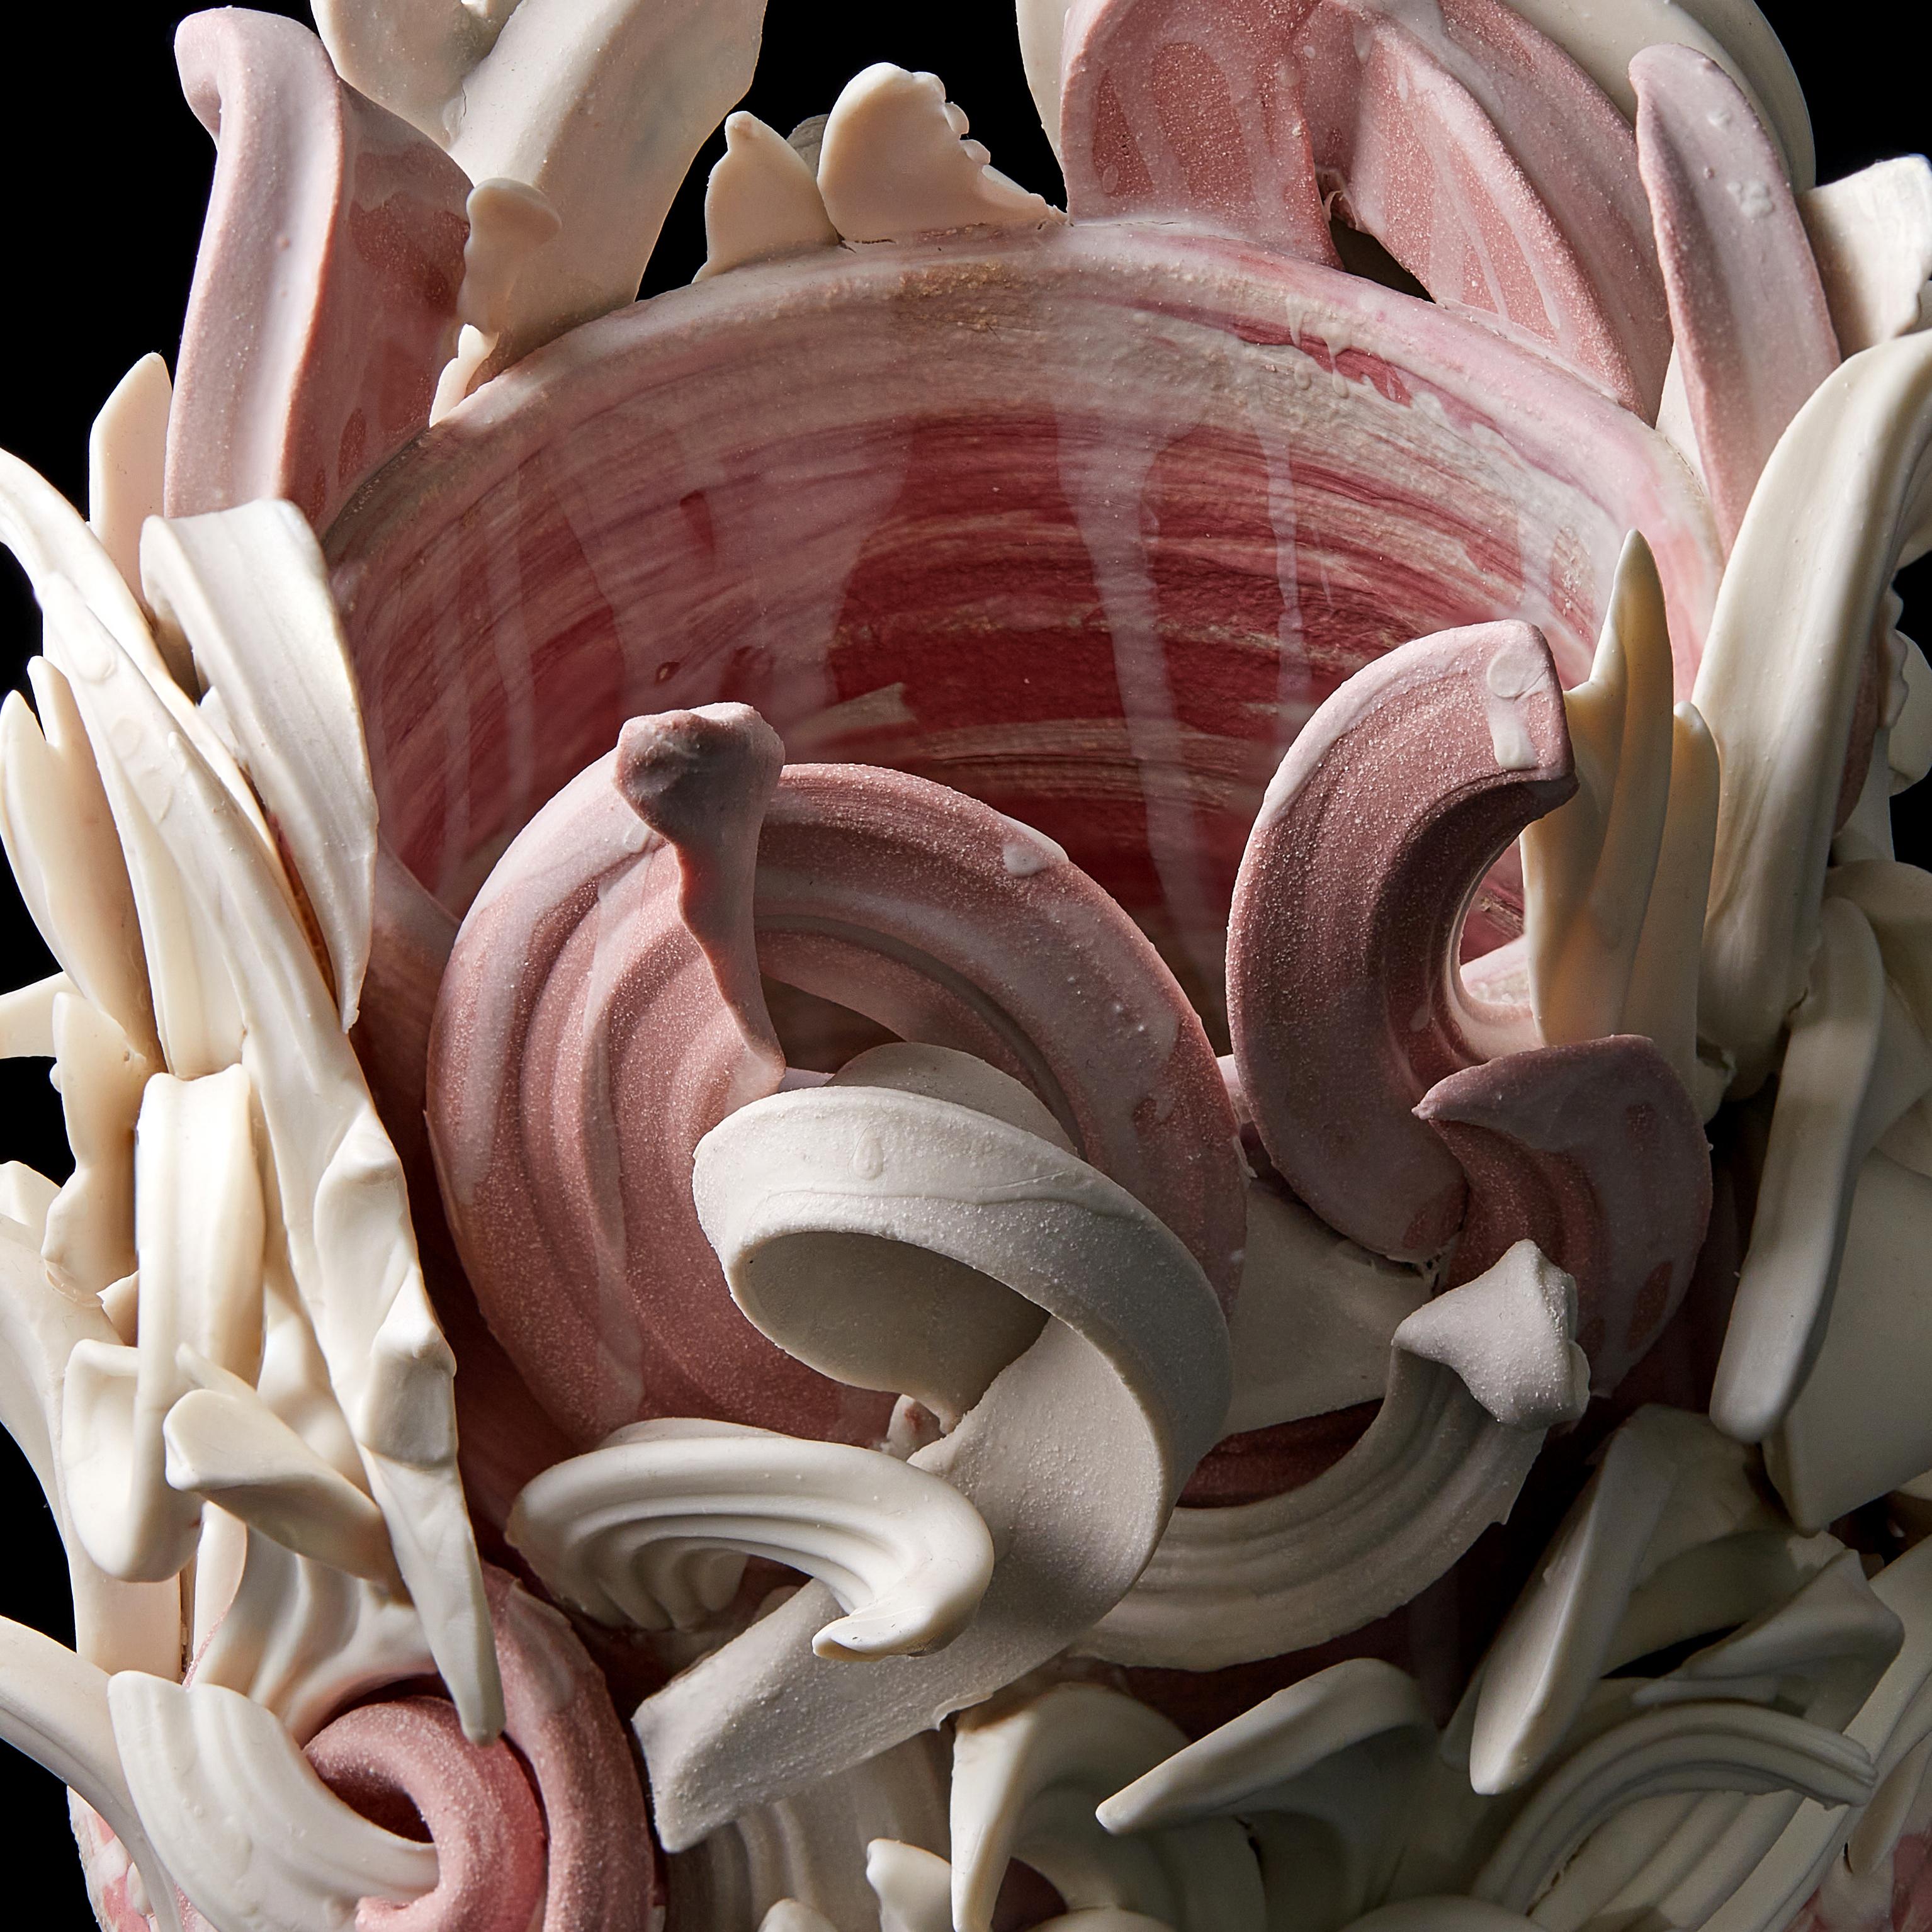 Colonnade I, a Unique Ceramic Sculptural Vase in Pink & White by Jo Taylor For Sale 8